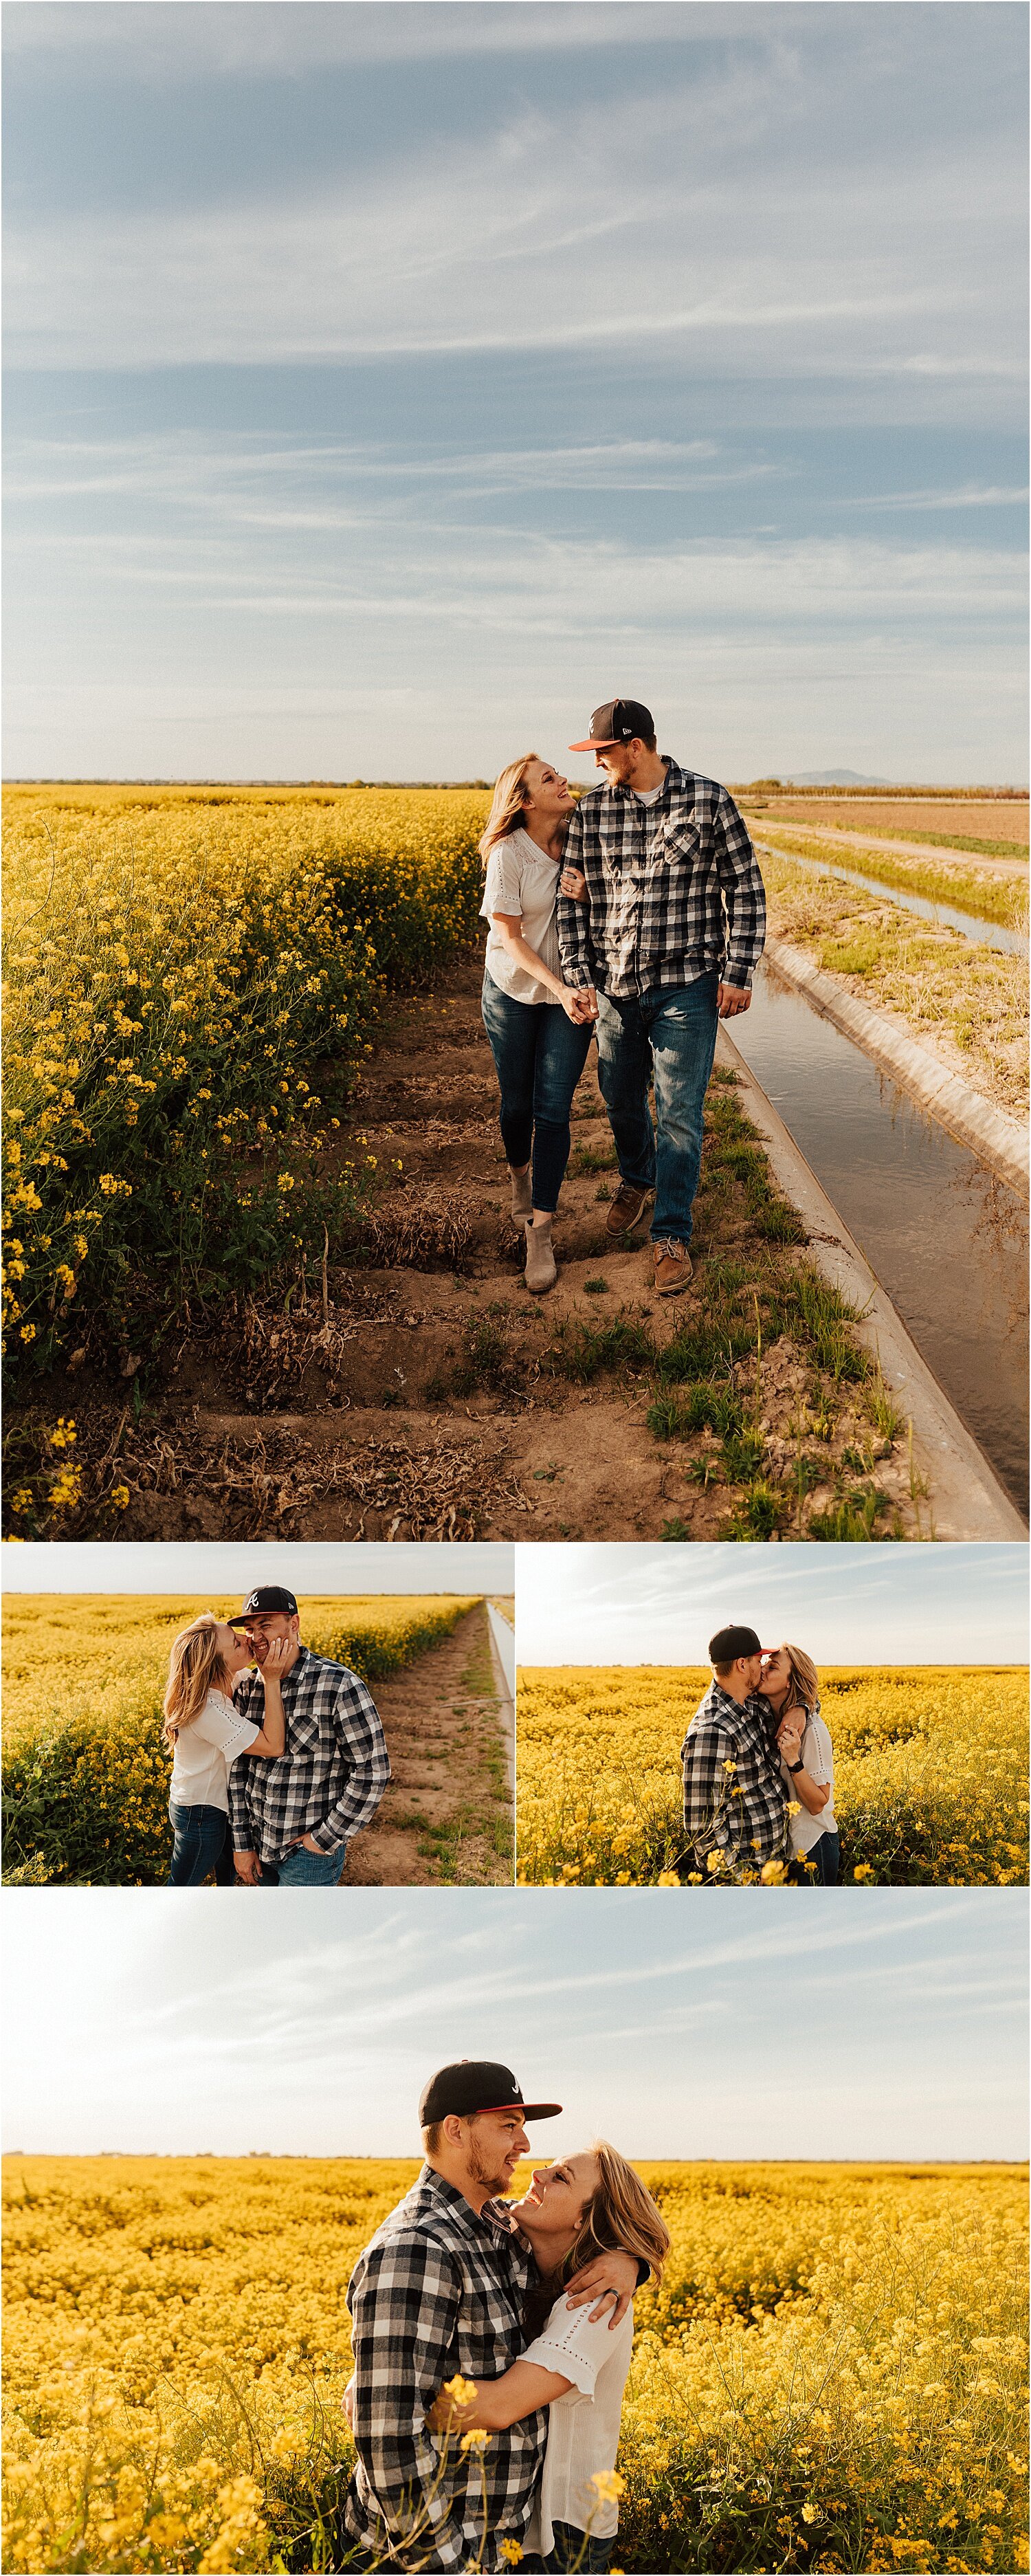 spring field of yellow flowers family session24.jpg